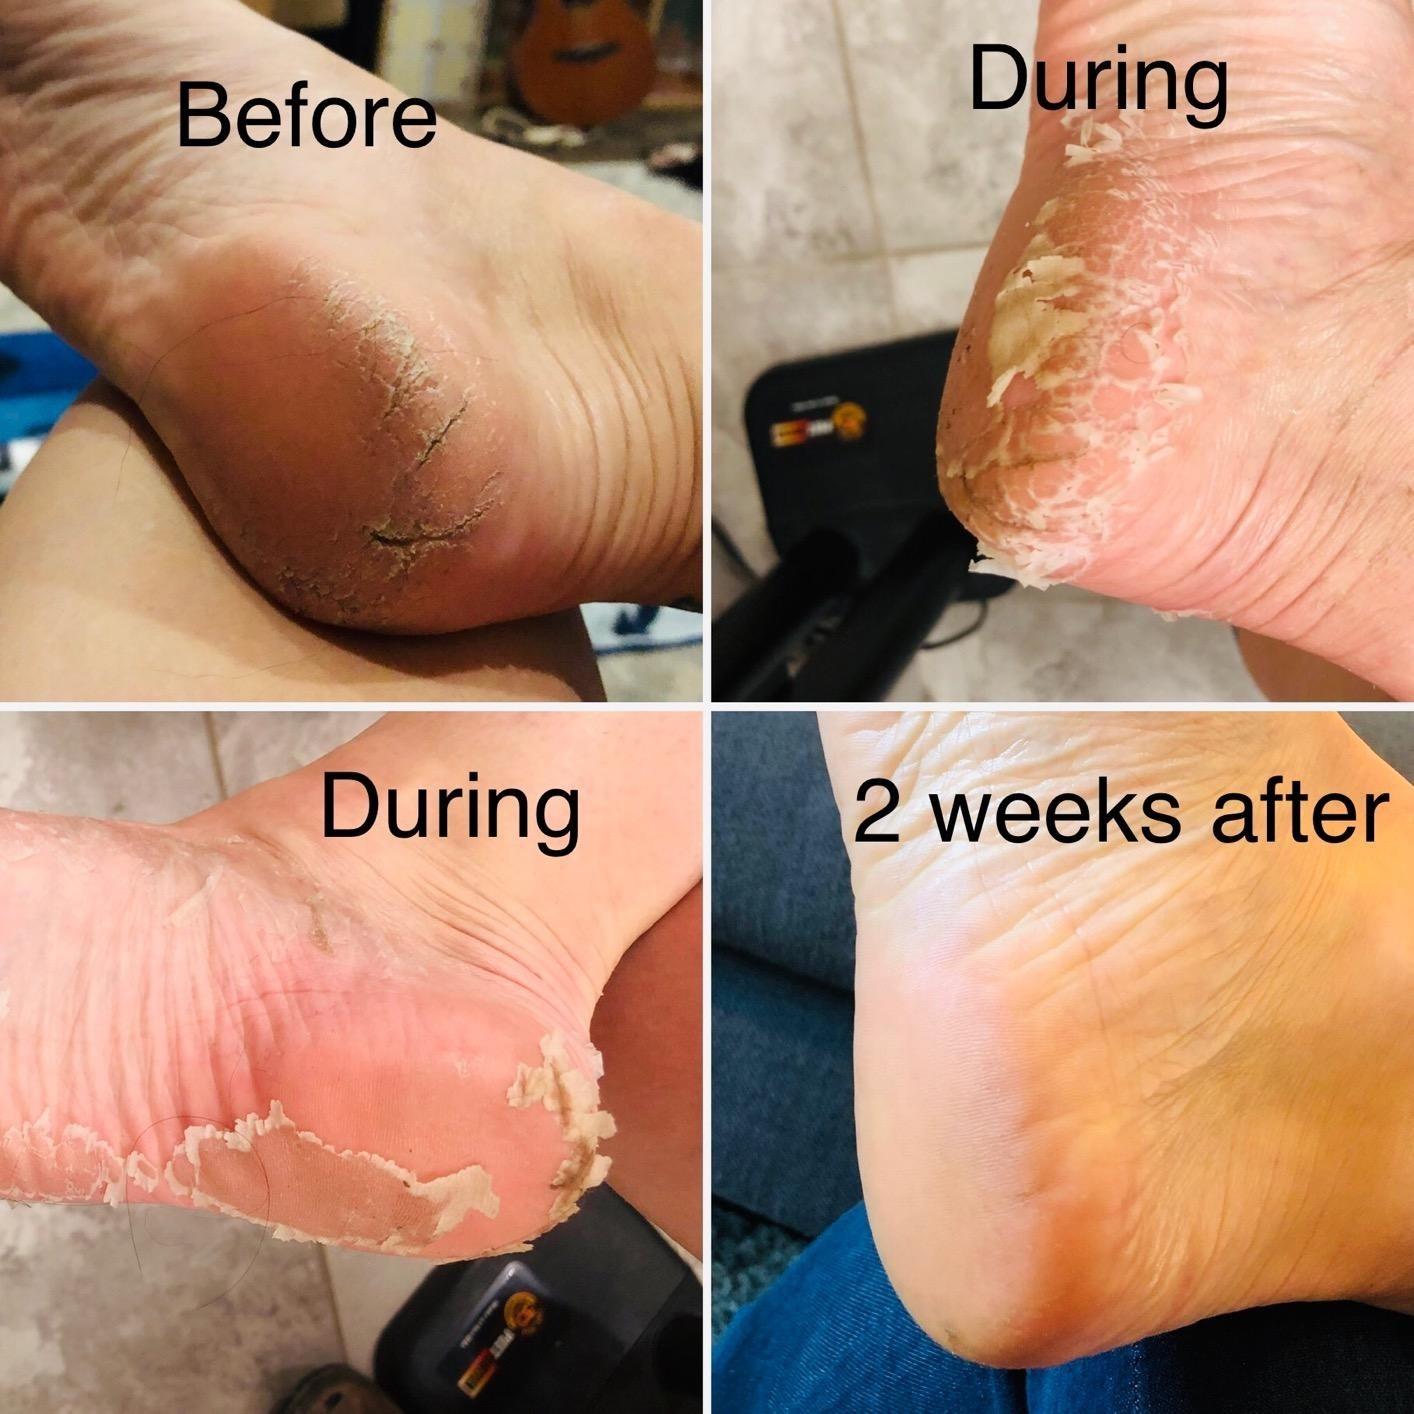 A before/during after photo showing how the baby foot helped cracked feet